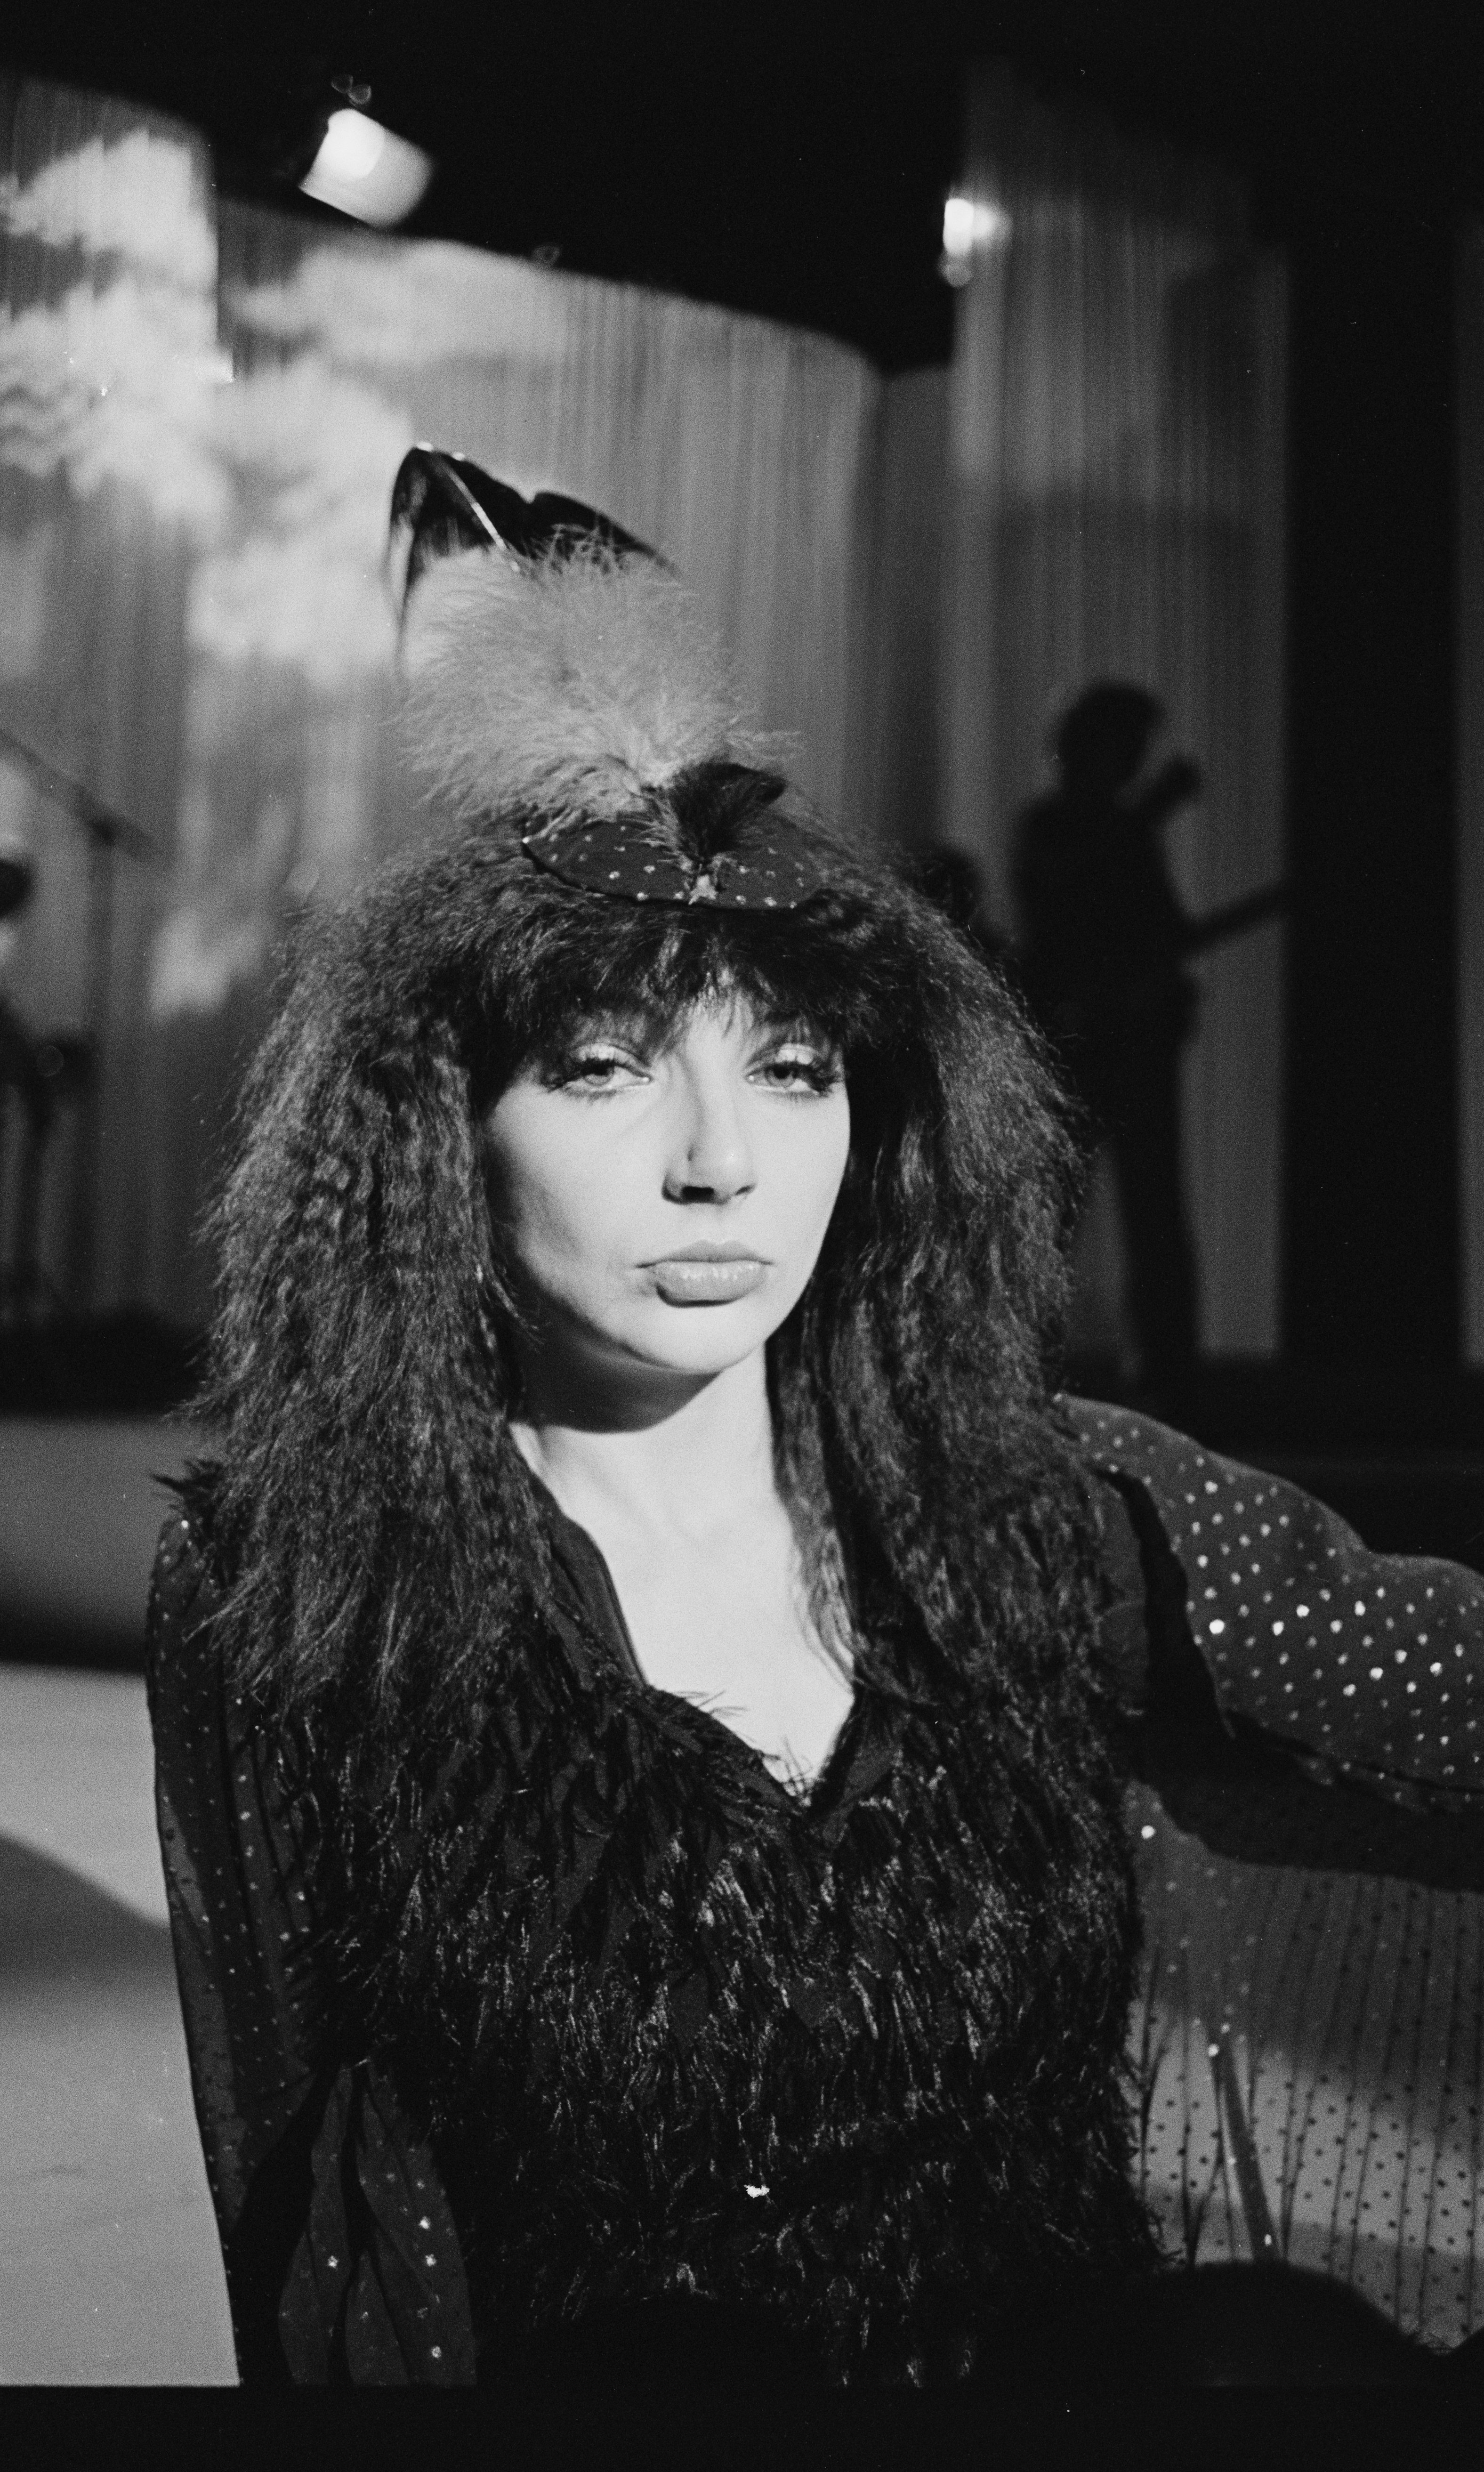  Kate Bush performing on the set of the BBC television special 'The Wedding List', November 1979 | Photo: Getty Images